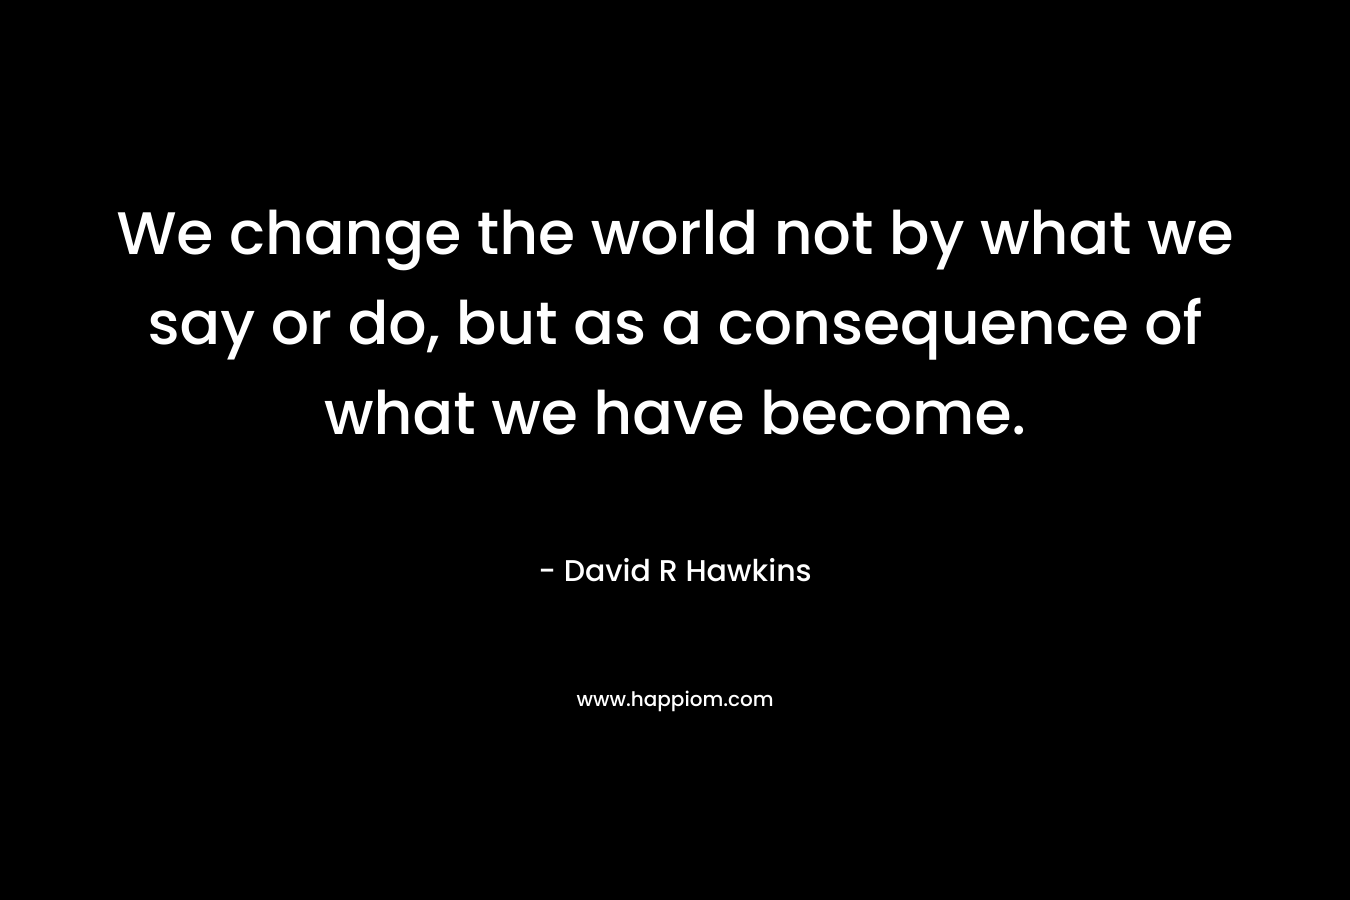 We change the world not by what we say or do, but as a consequence of what we have become.